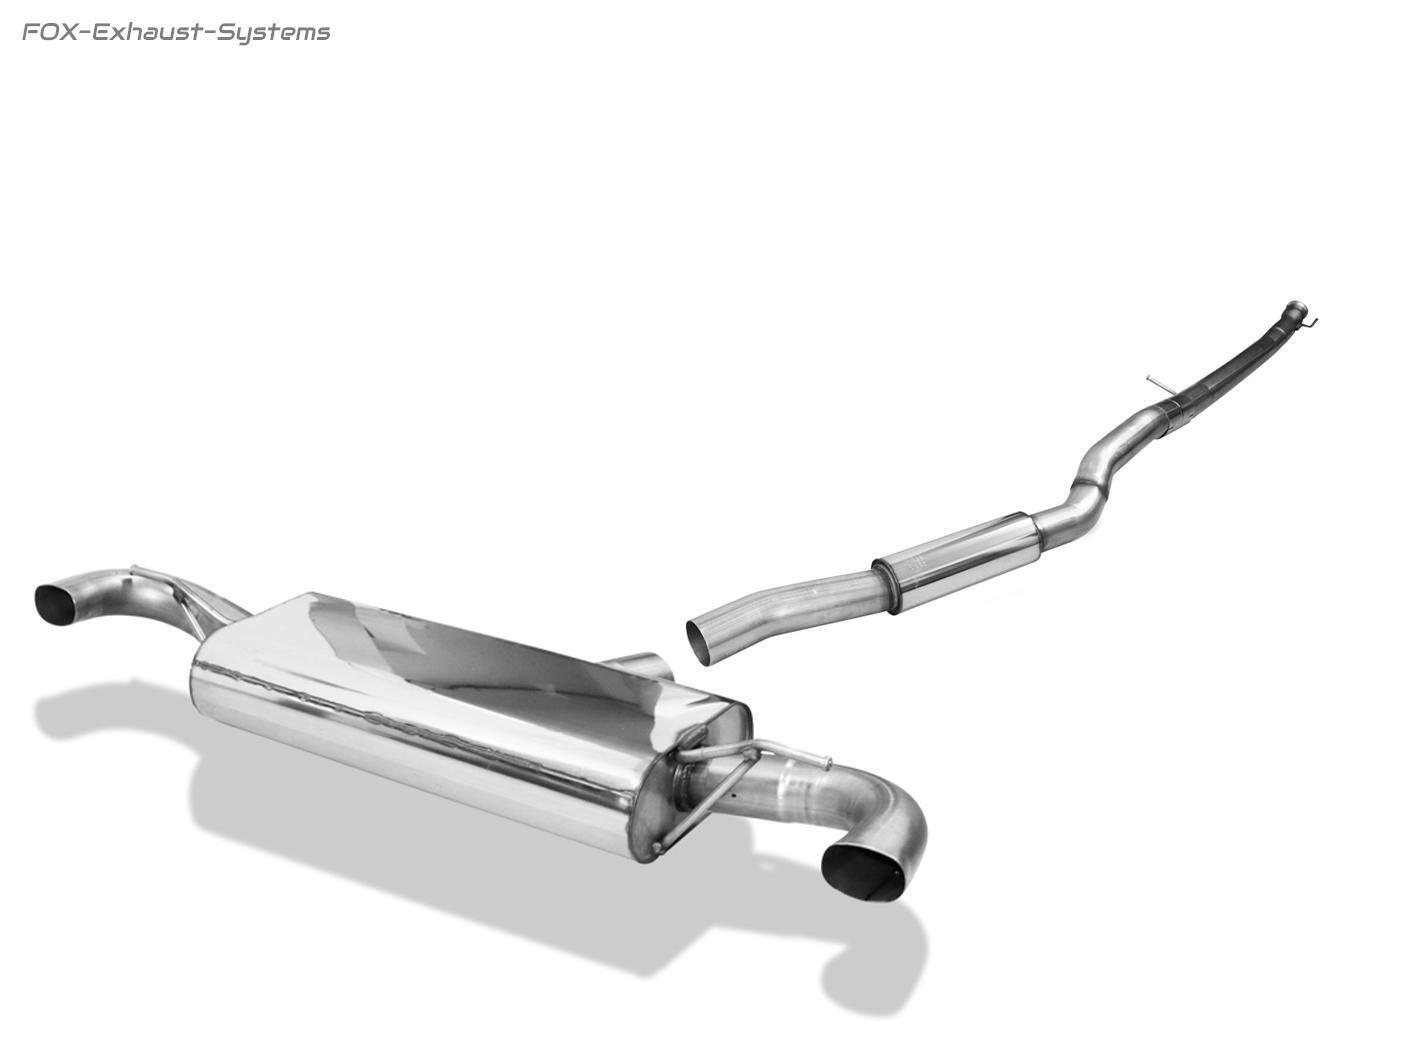 Stainless Steel Duplex Sports Exhaust System From Cat. Mercedes A45 AMG